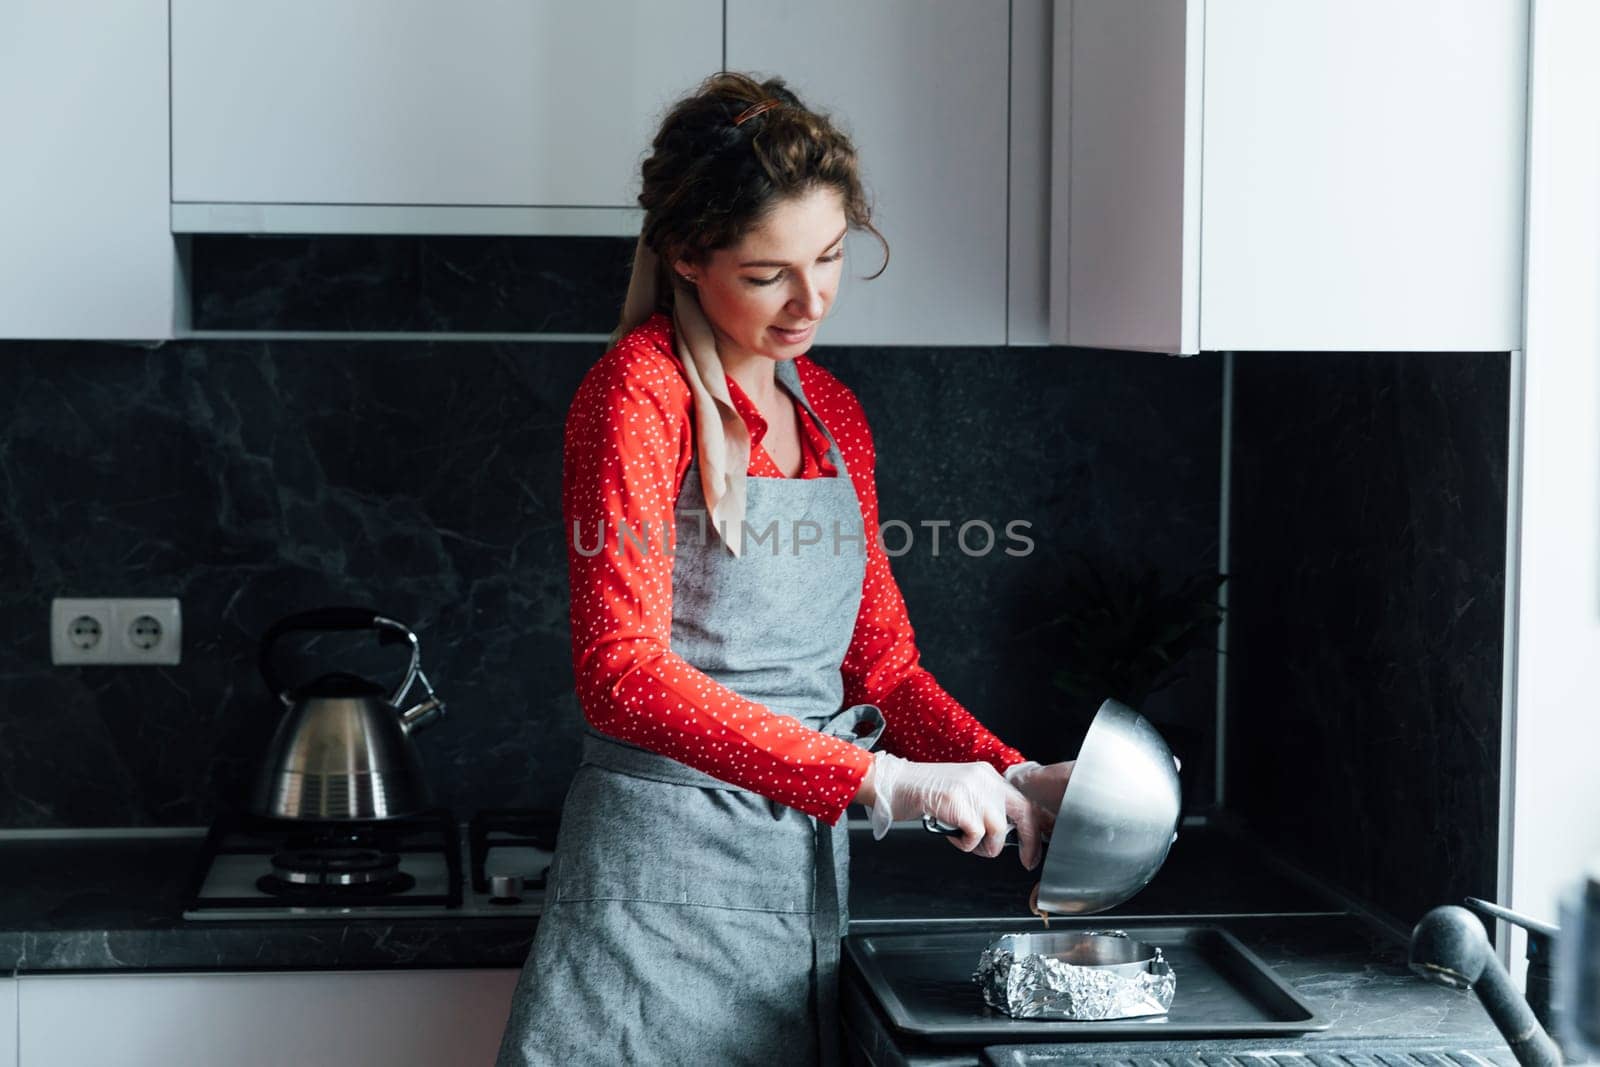 a housewife prepares food in the kitchen with gloves